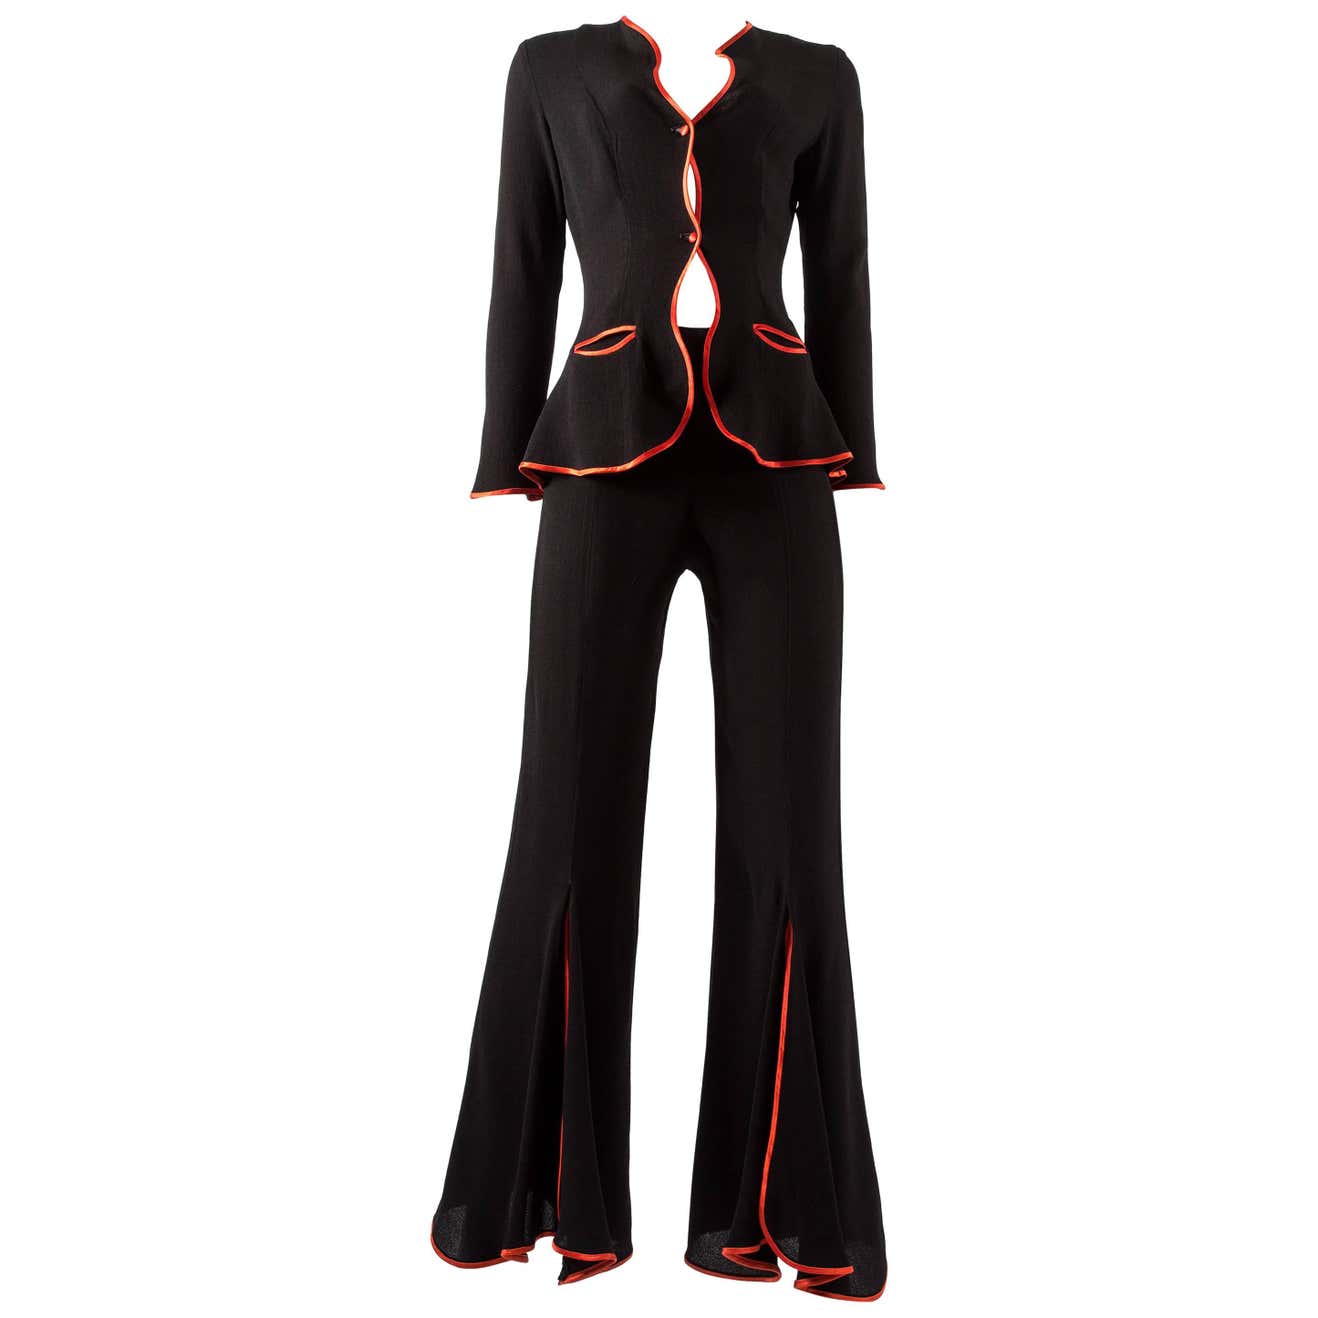 Ossie Clark 1970 black moss crepe 'Judy' pant suit with red satin trim ...